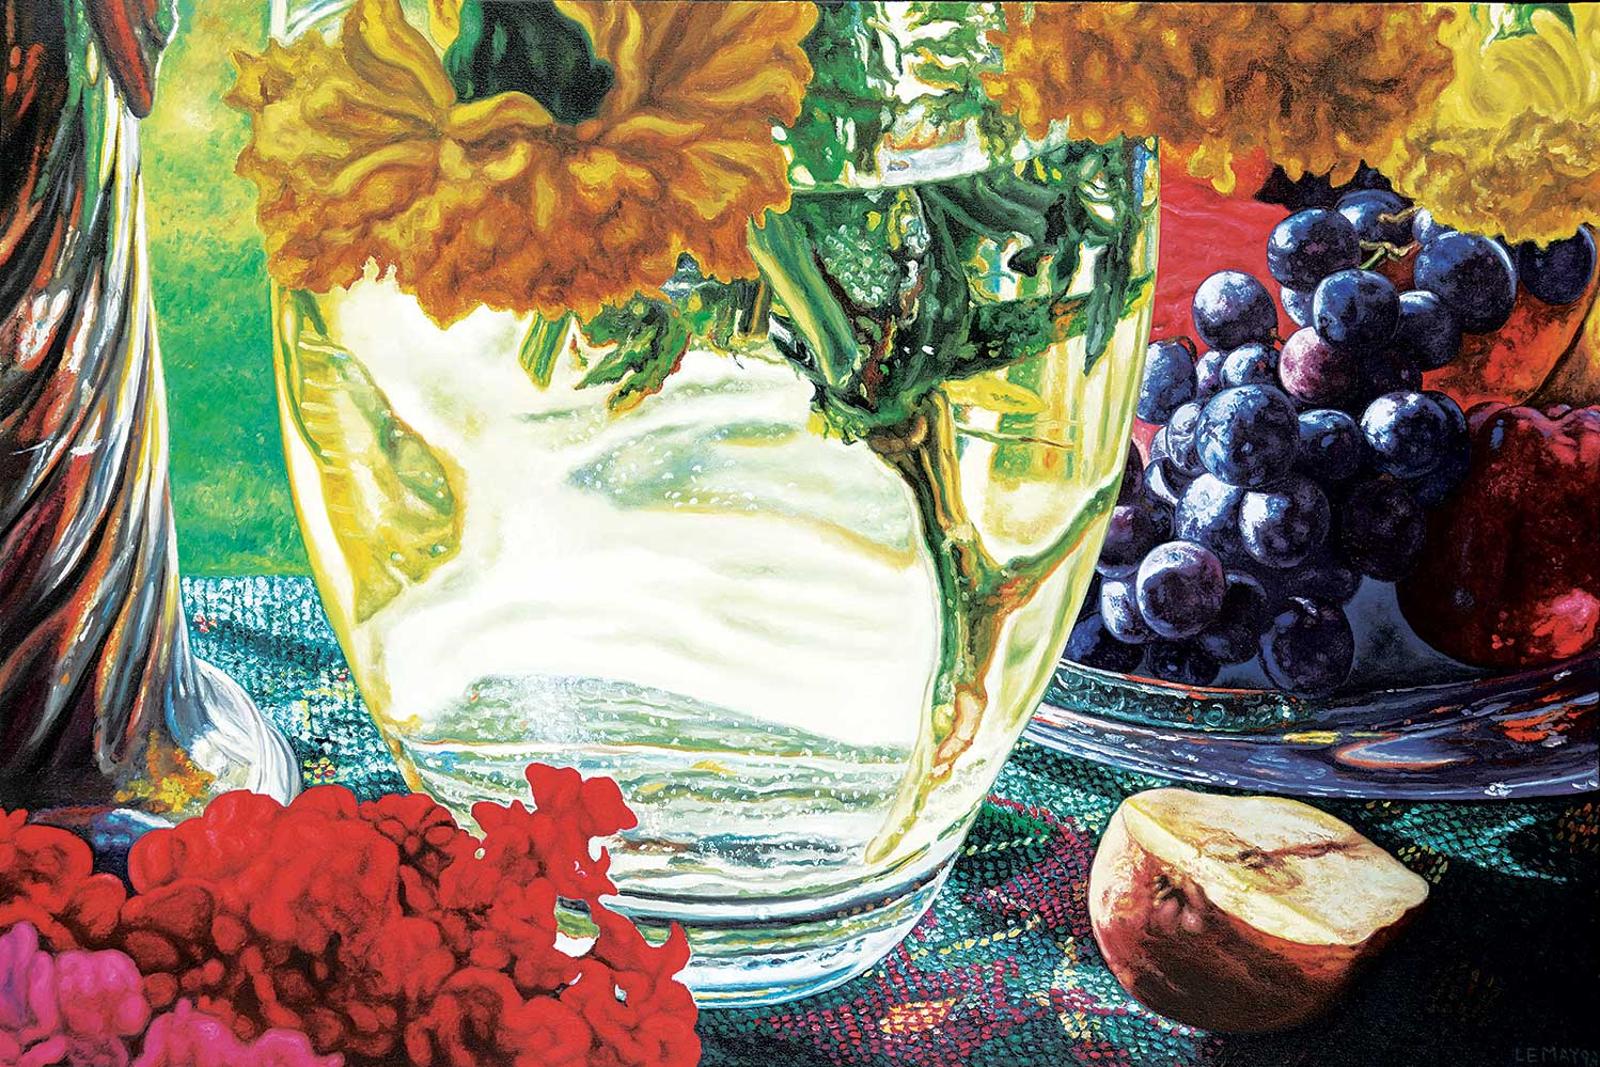 Robert Lemay (1961) - Vase with Grapes